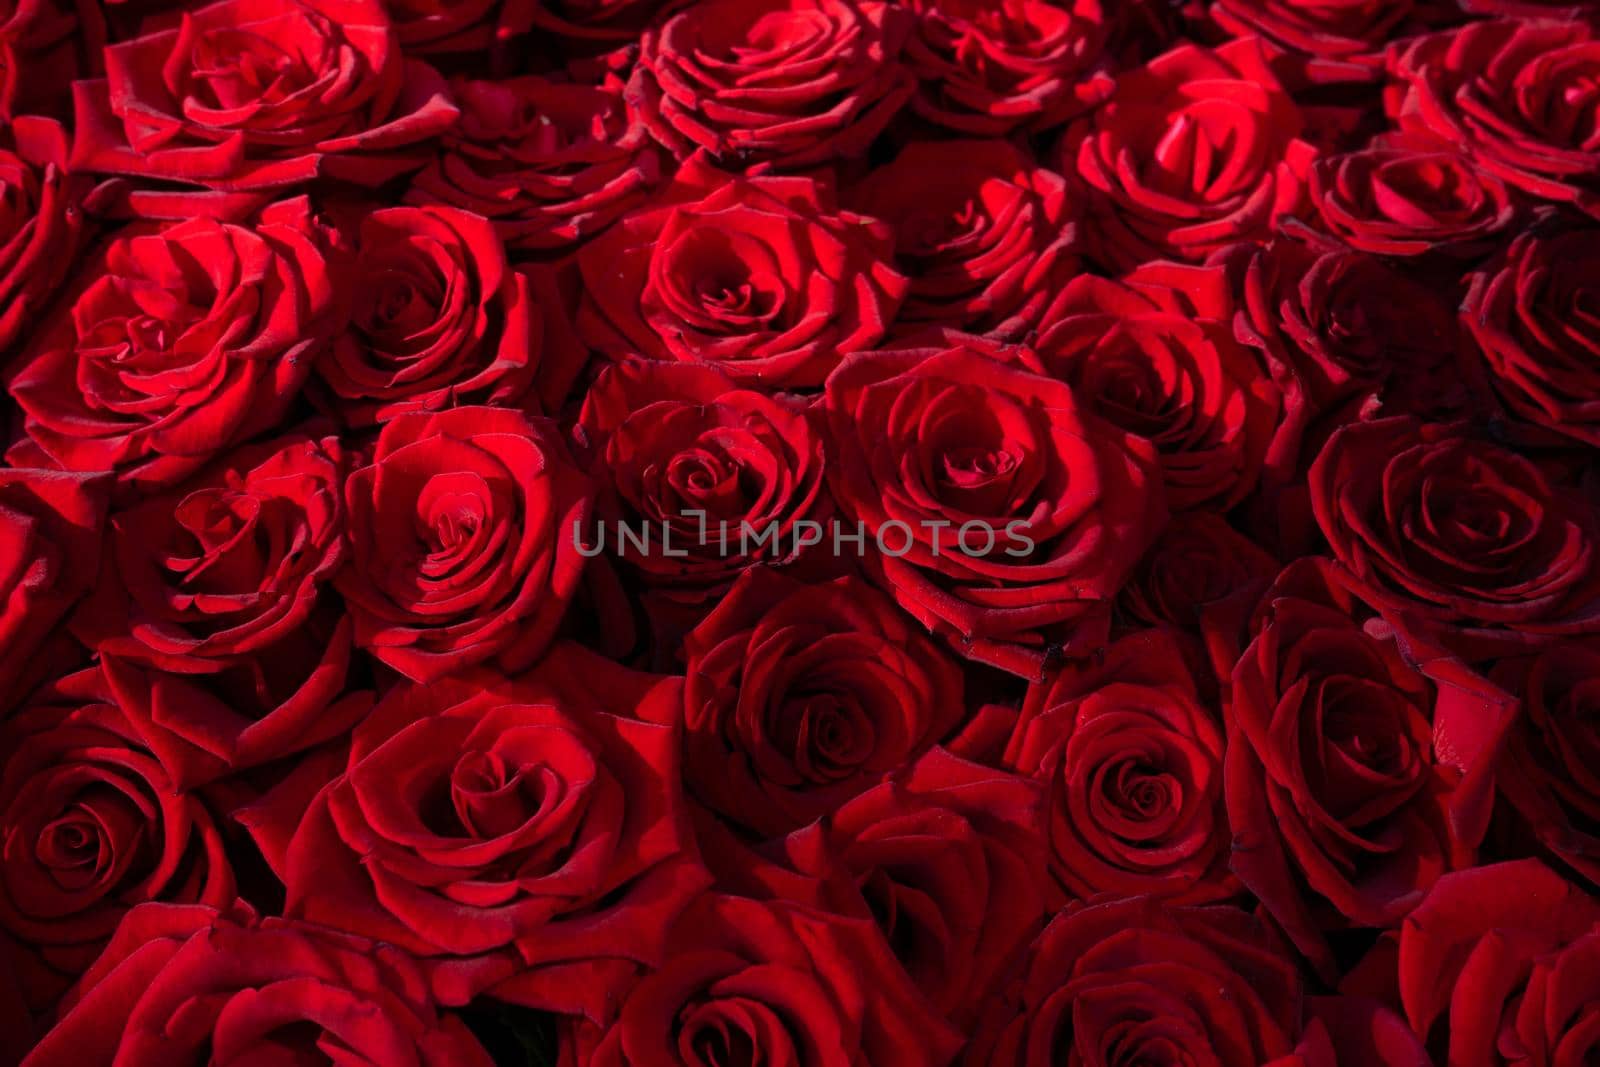 Many blooming red roses with romantic lighting by Serhii_Voroshchuk